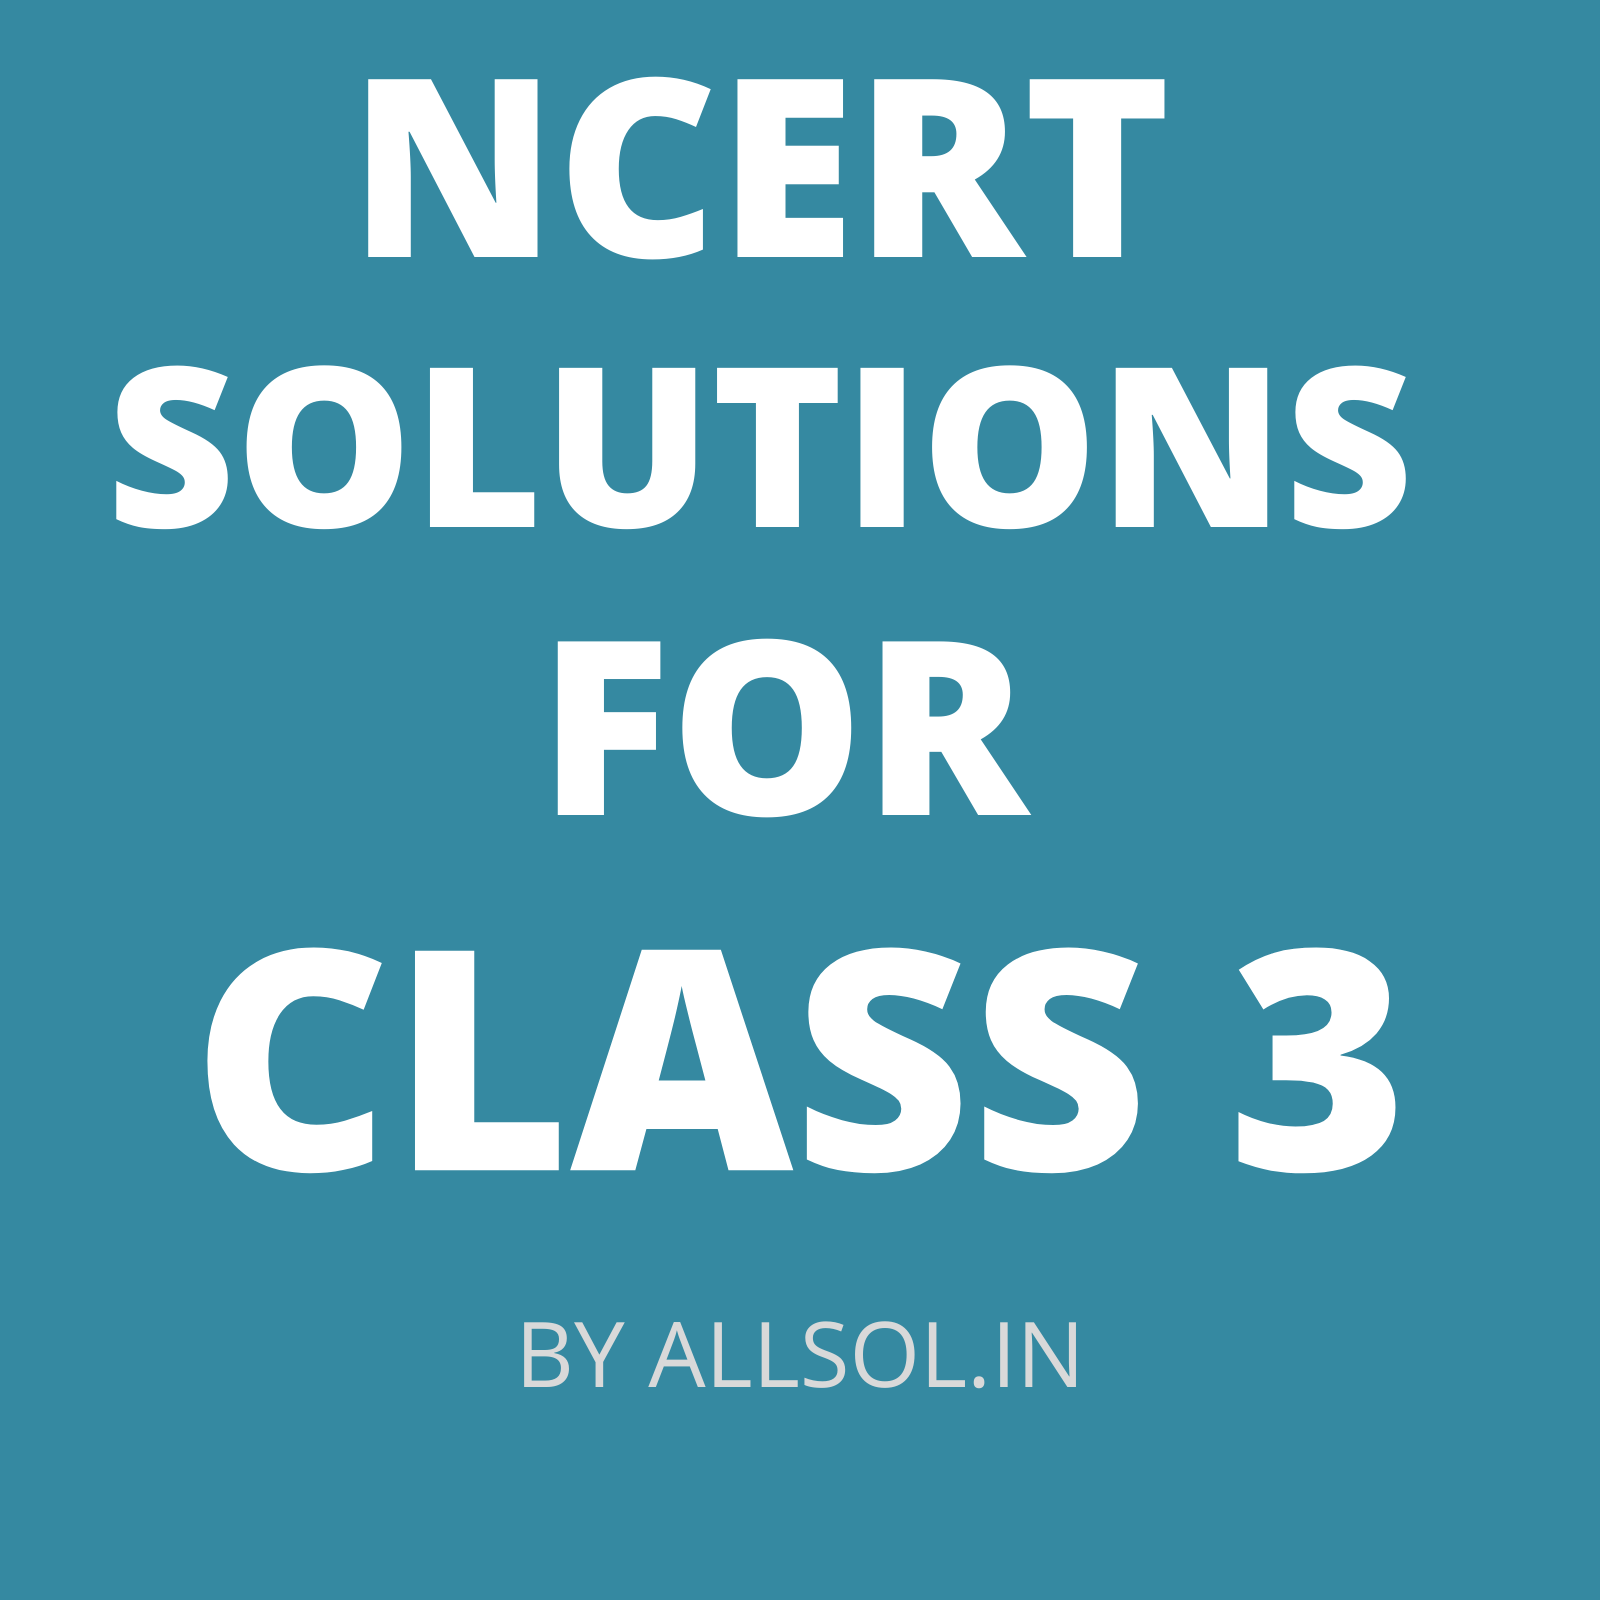 NCERT Solutions for Class 3 |